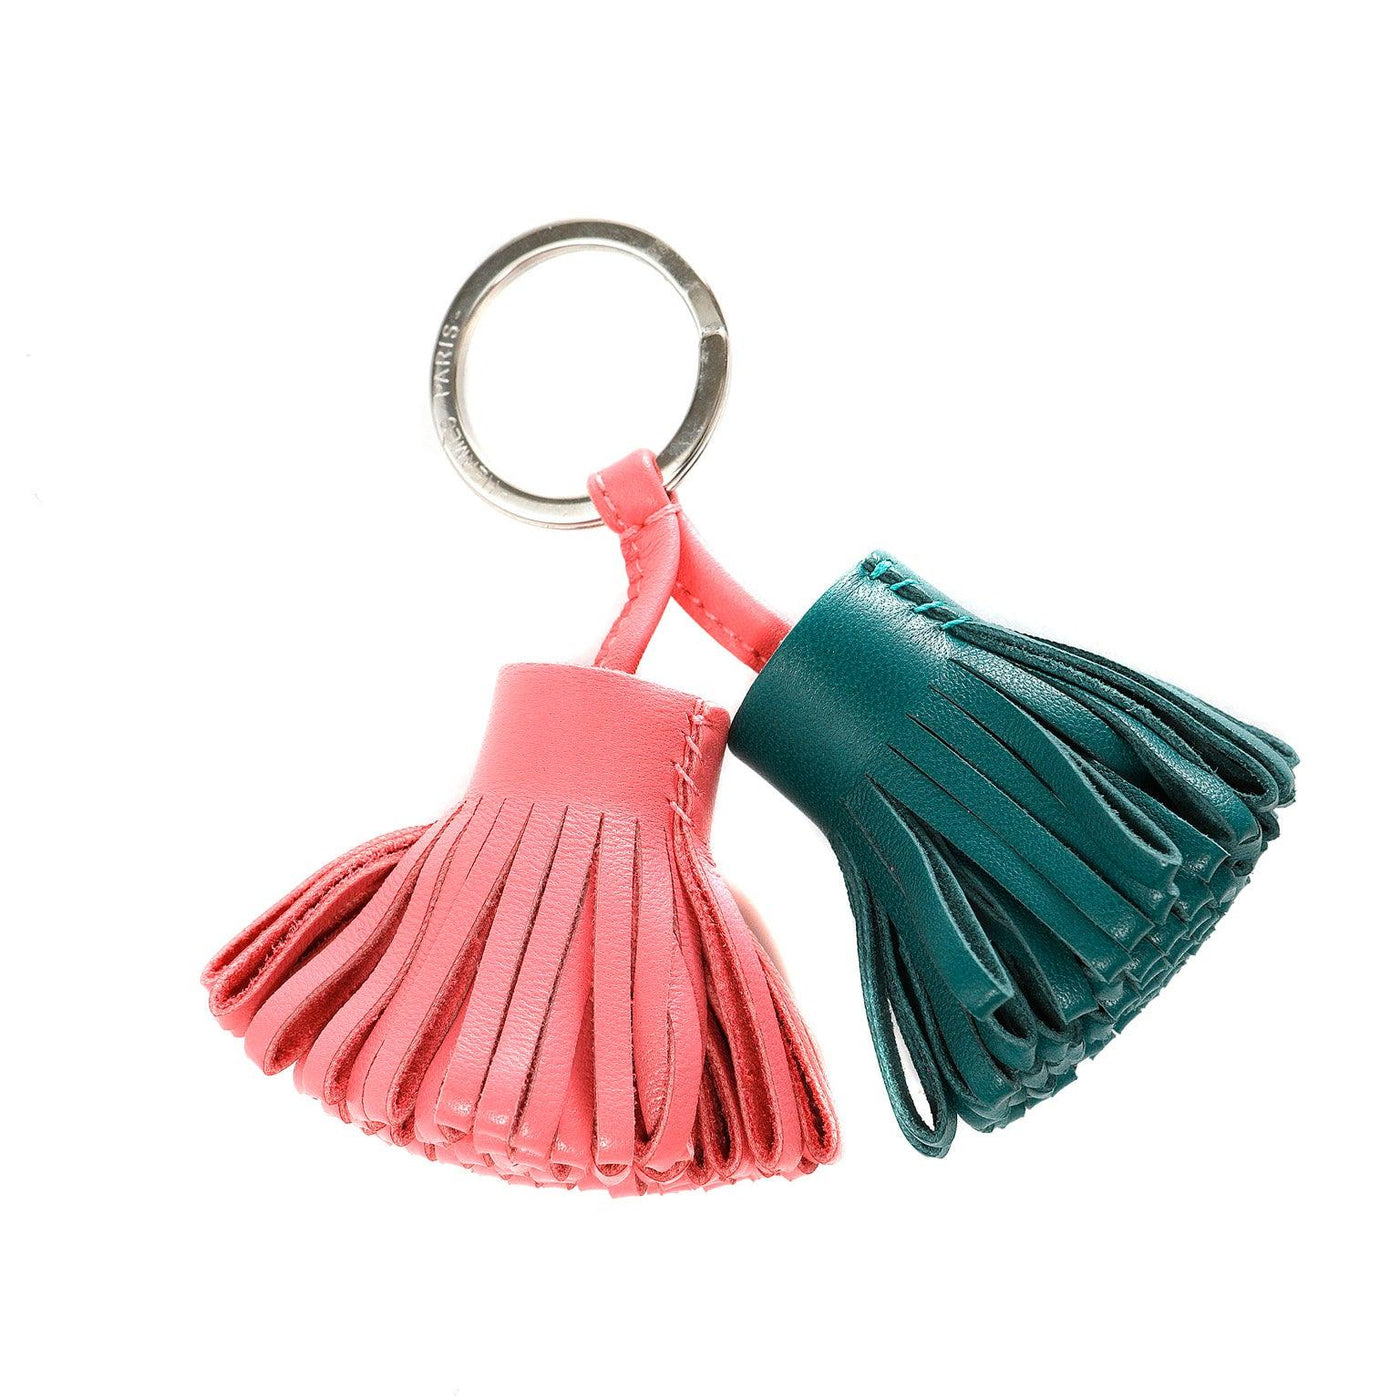 Hermes Green & Pink Double Car Wash Key Chain - Only Authentics